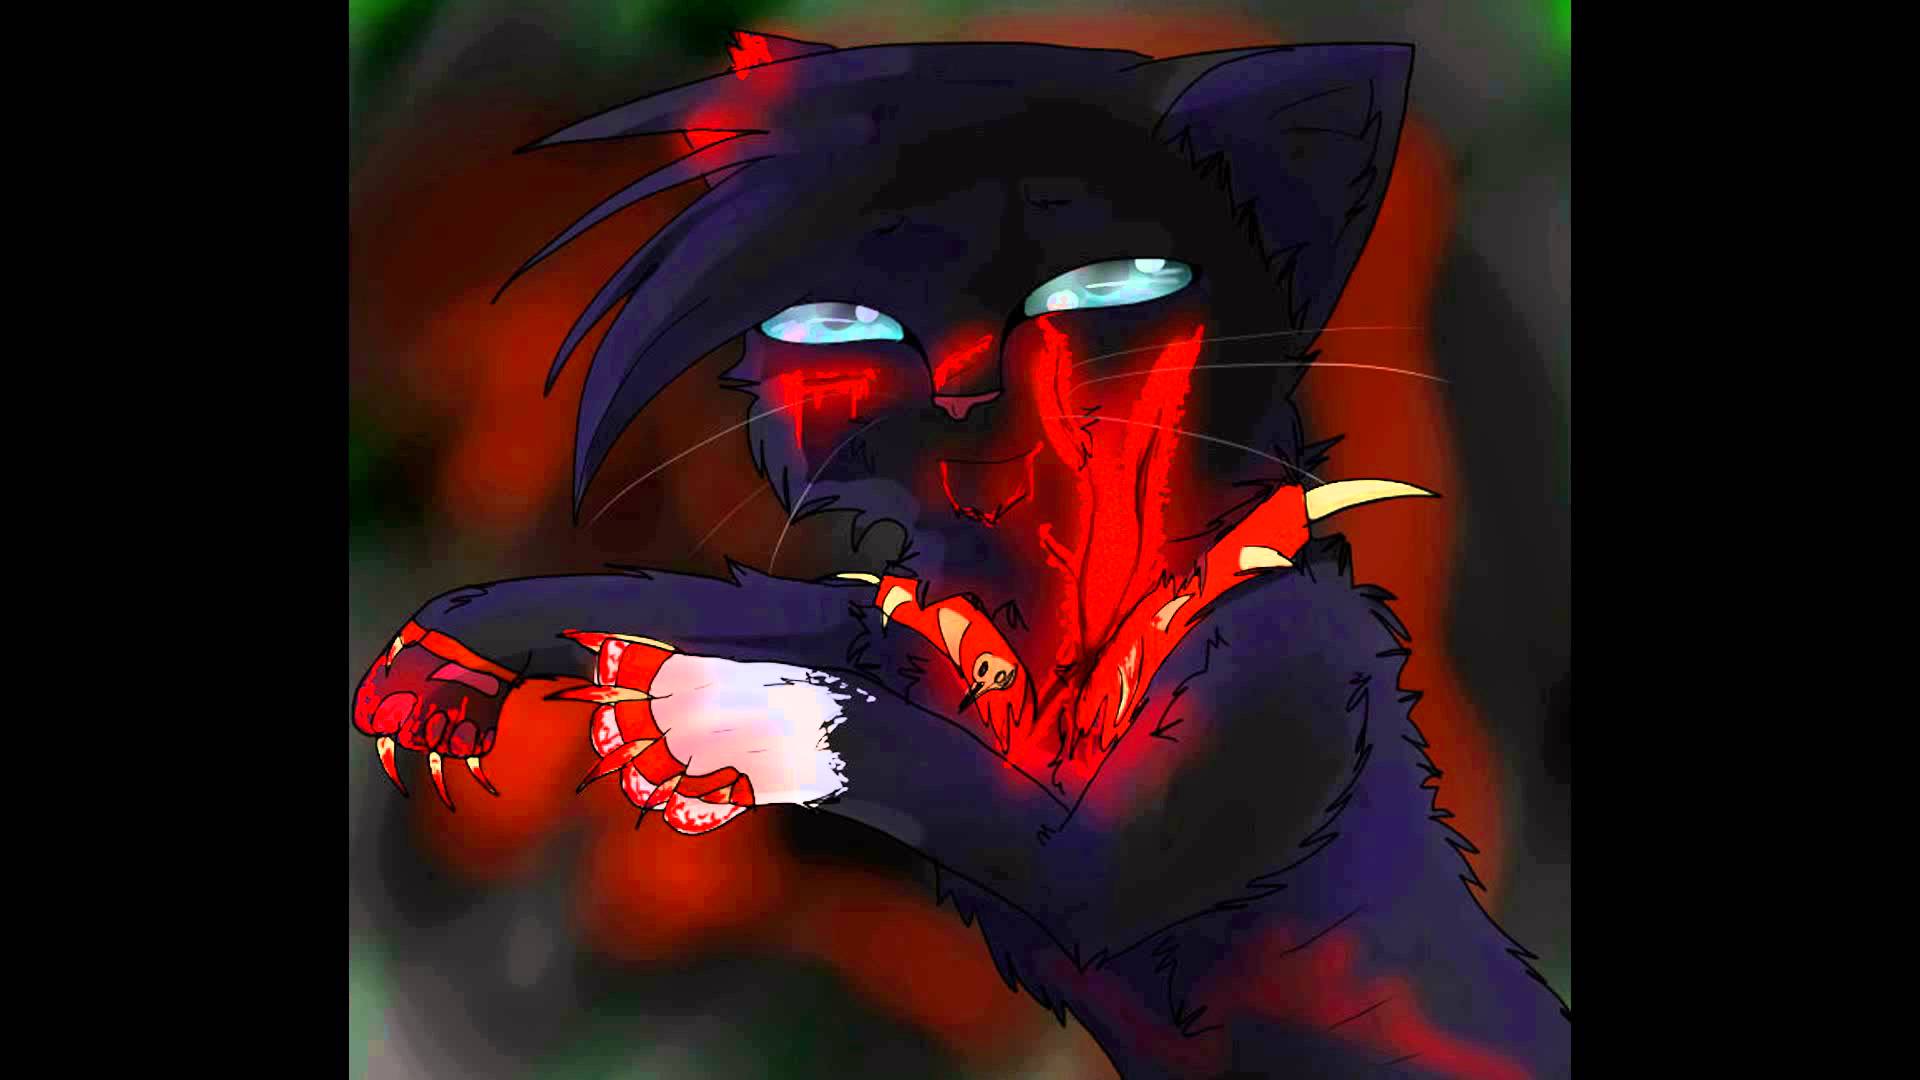 Scourge warrior cats wallpaper by Yuilioness - Download on ZEDGE™